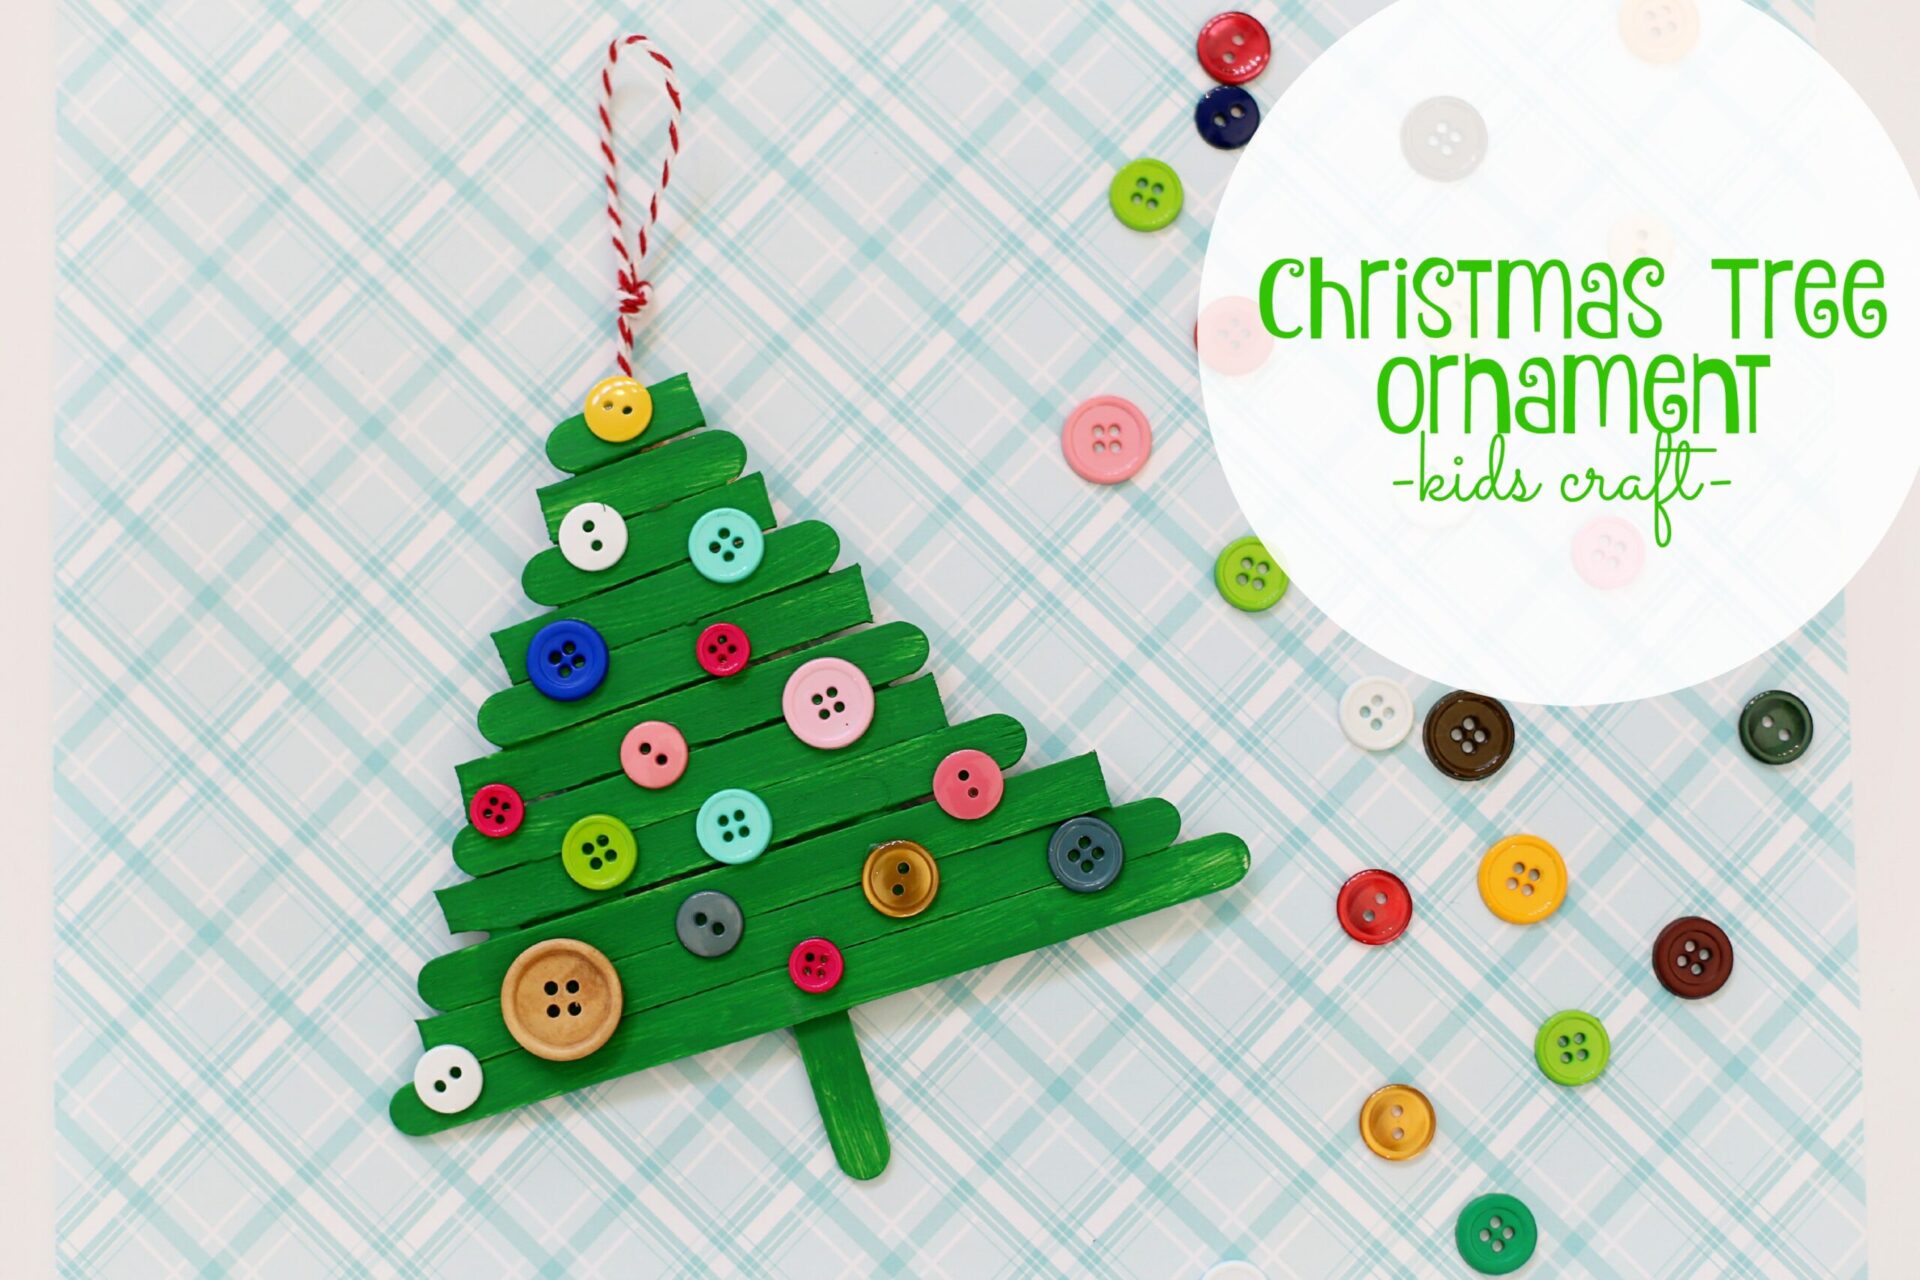 Simple Popsicle Christmas Tree Craft Project - She Saved